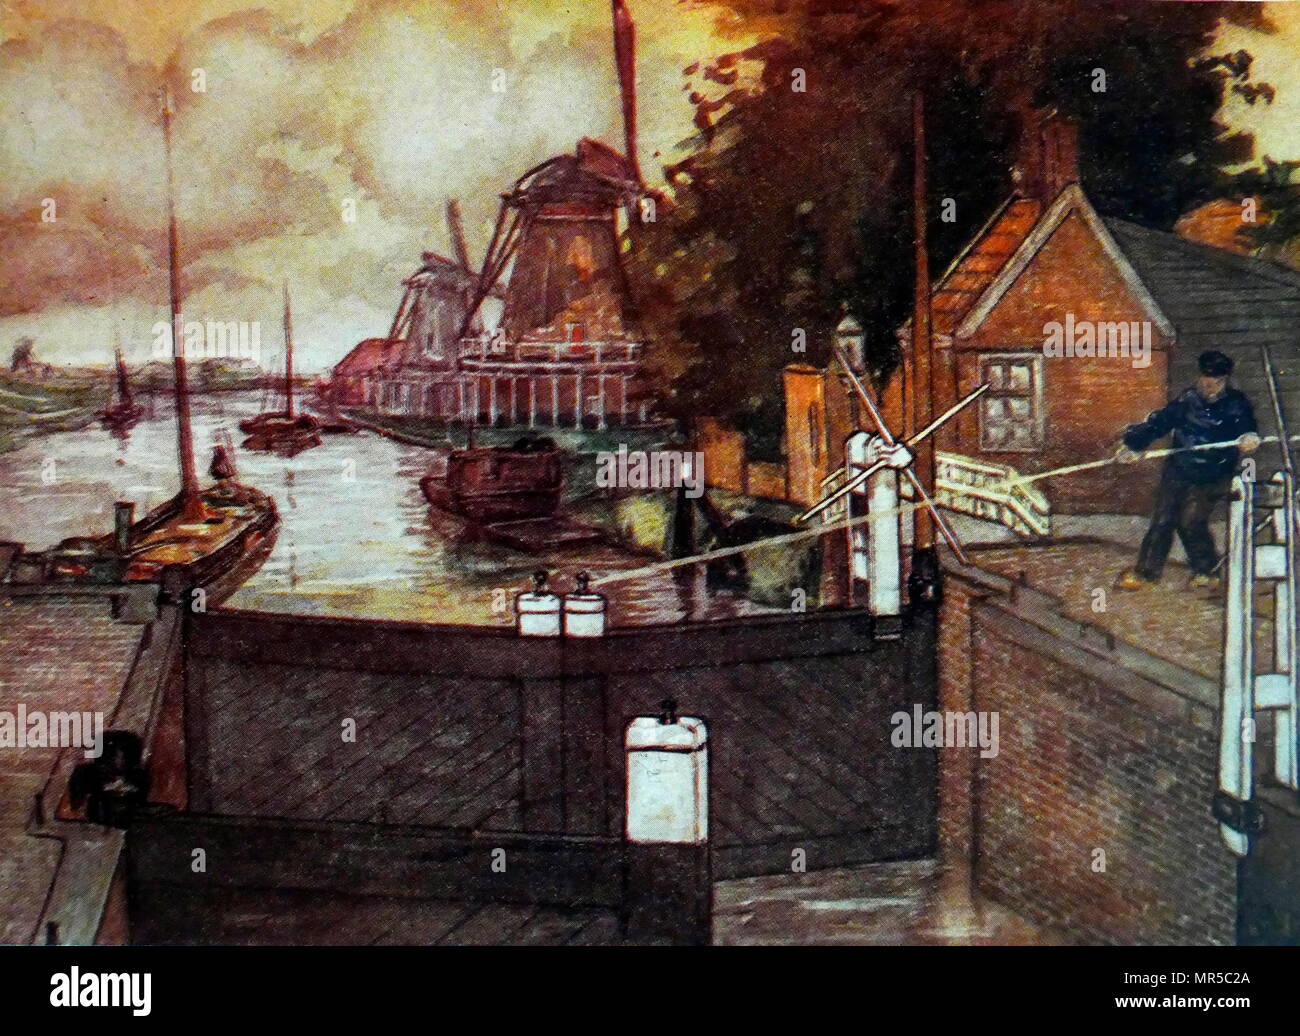 Painting titled 'Noordervaldeursluis, Zaandam' by Nico Jungmann. Nico Jungmann (1872-1935) an Anglo-Dutch painter of landscapes and figural subjects. Dated 20th Century Stock Photo